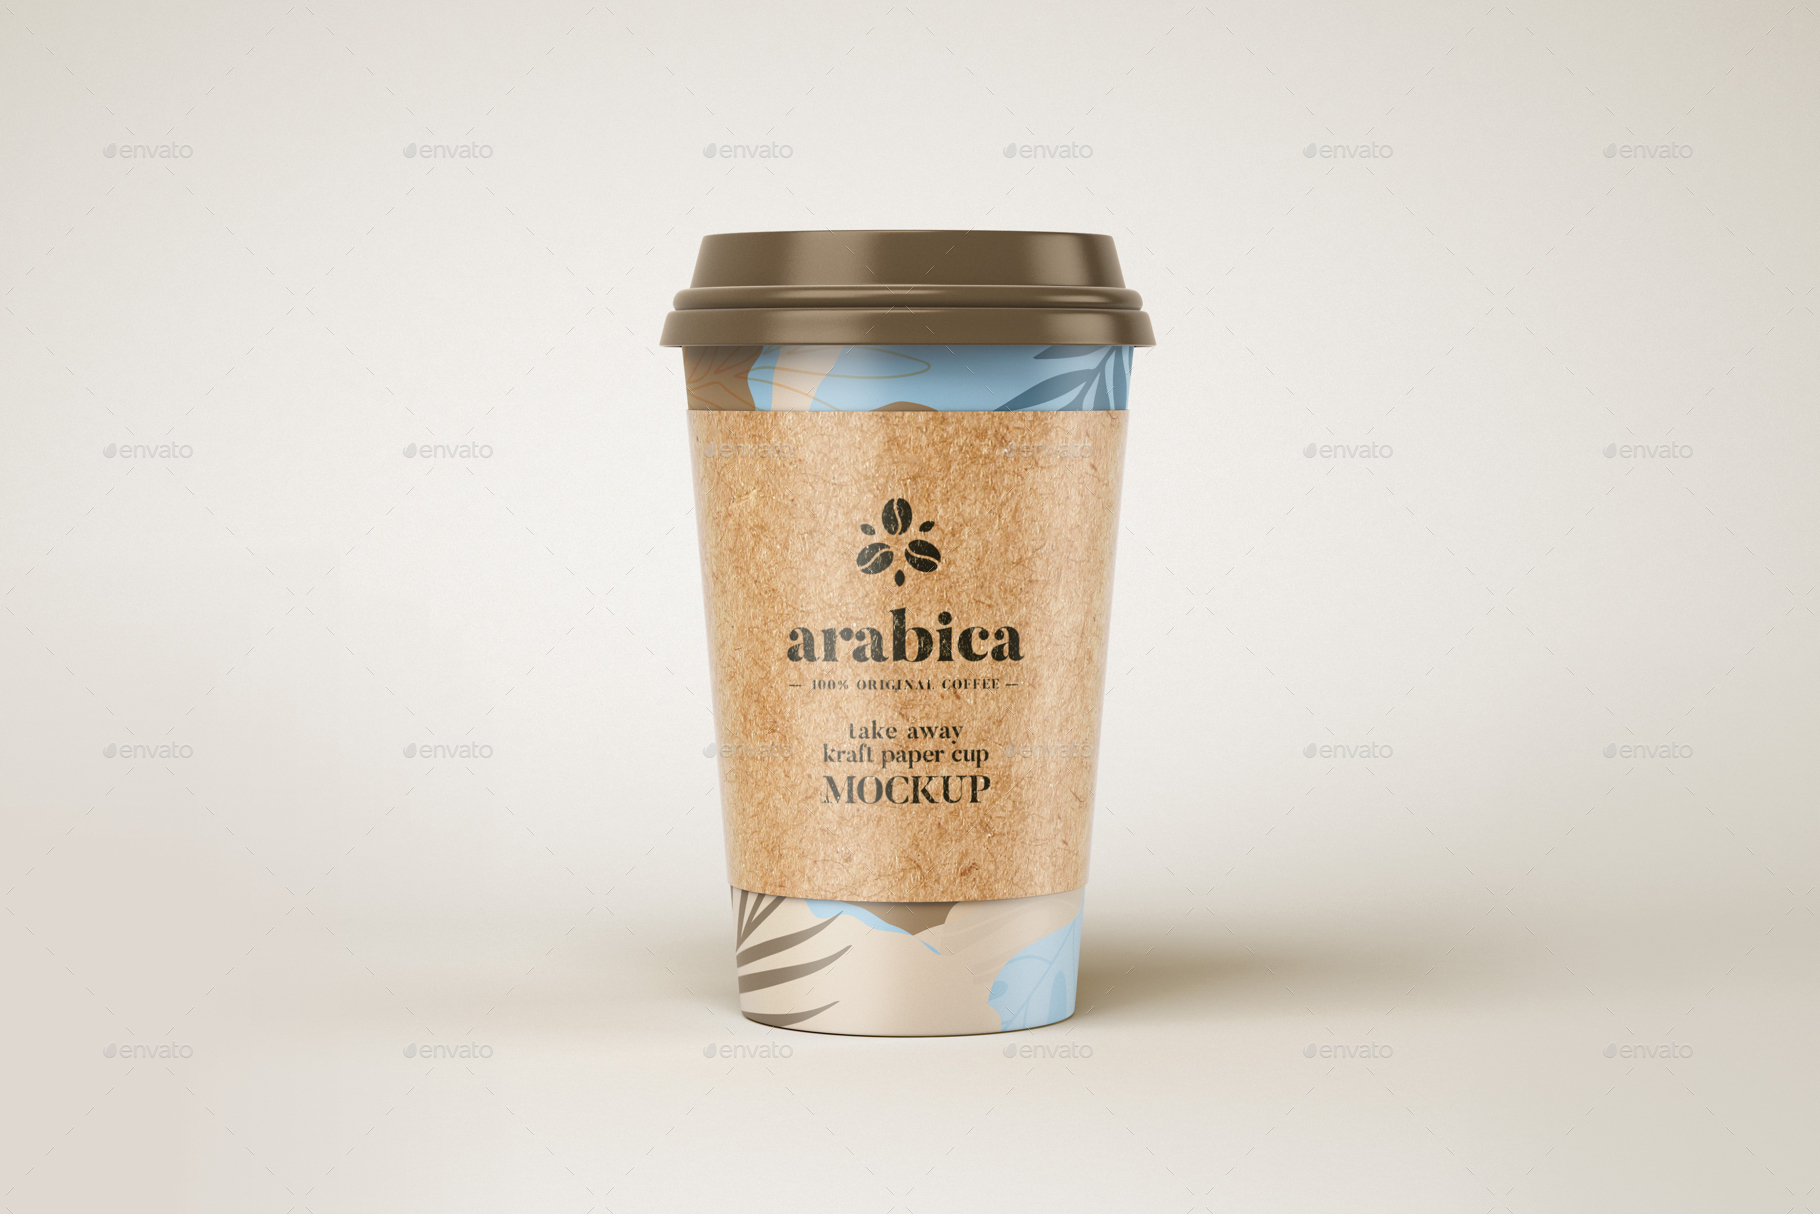 Paper Coffee Cup Black Lid 3D, Incl. to go cup & cafe - Envato